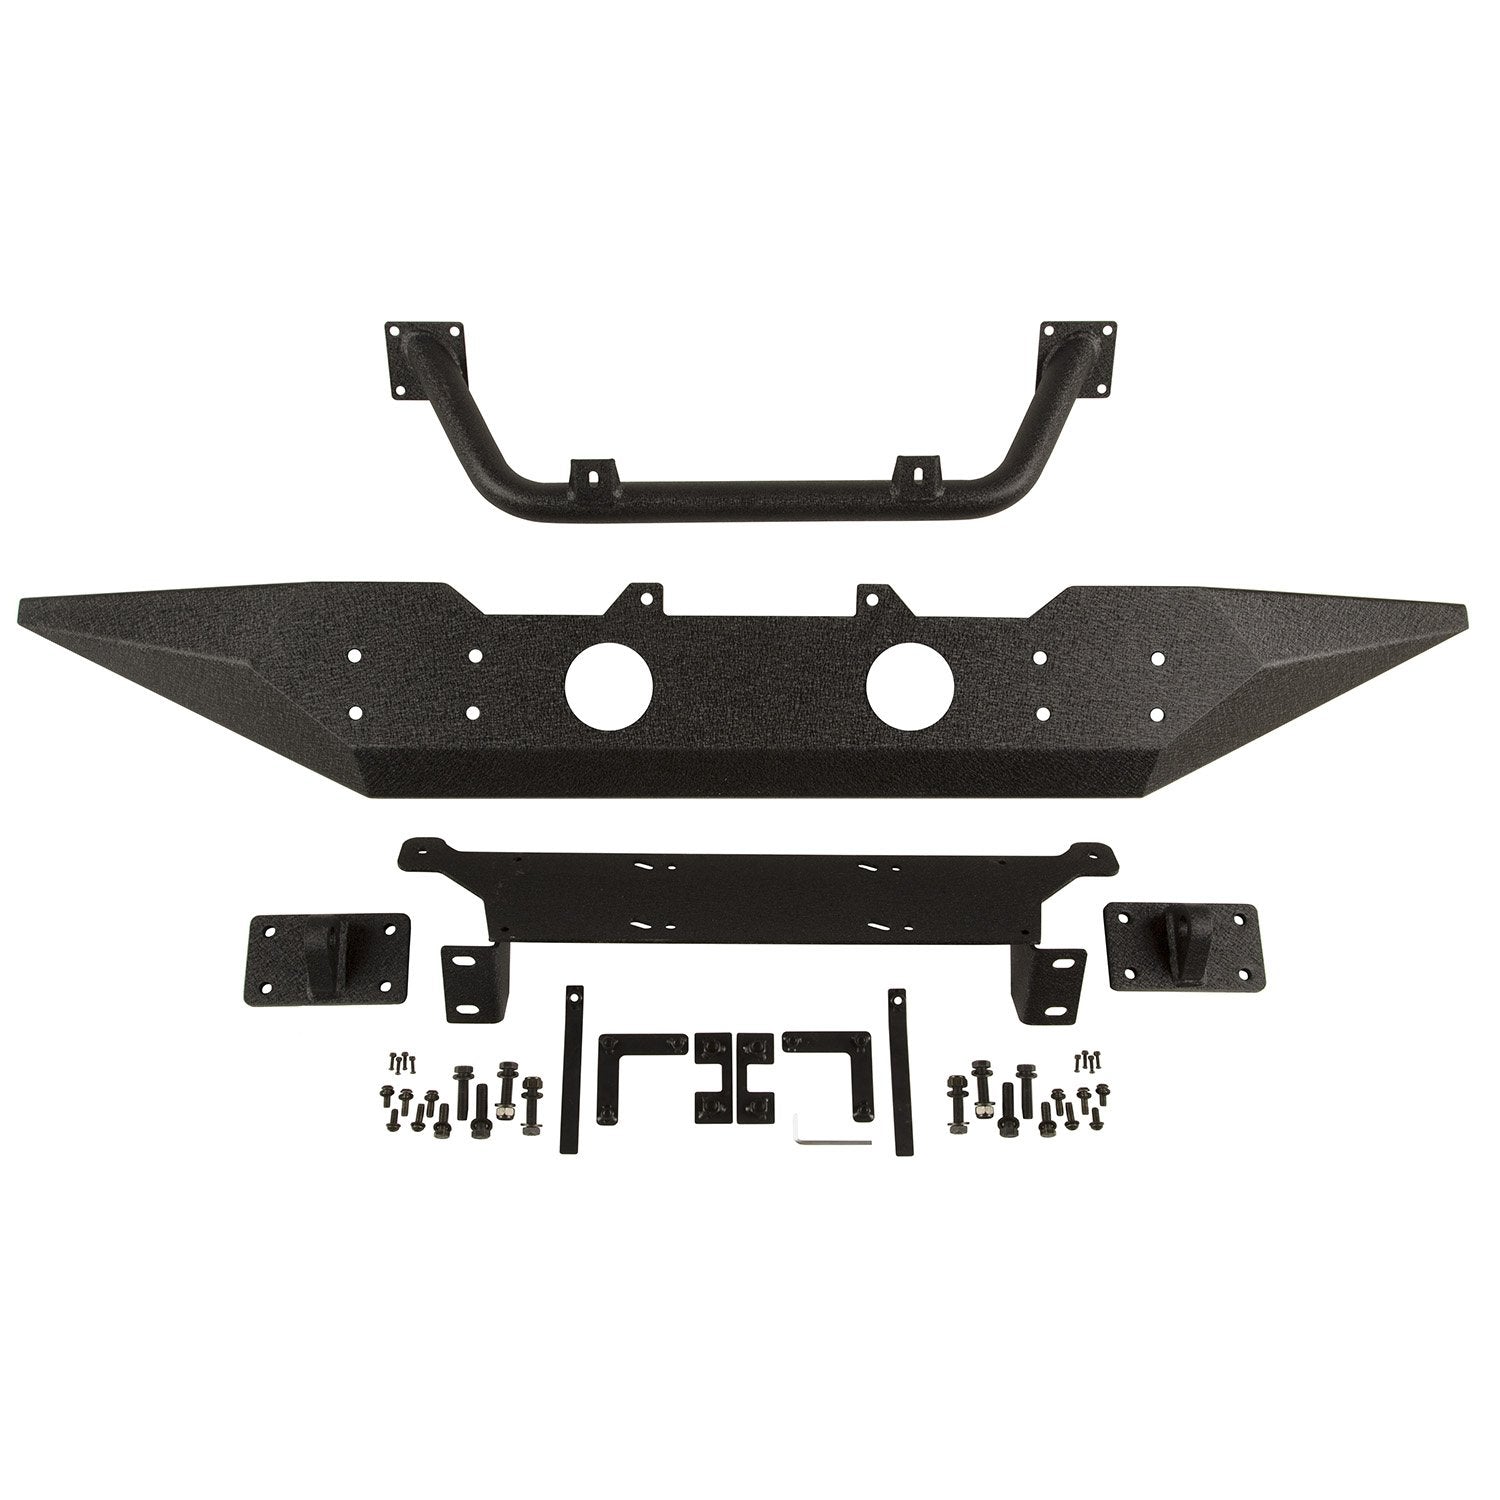 Rugged Ridge 11548.02 Spartan Front Bumper (Standard Ends With Over rider), 1 Pack